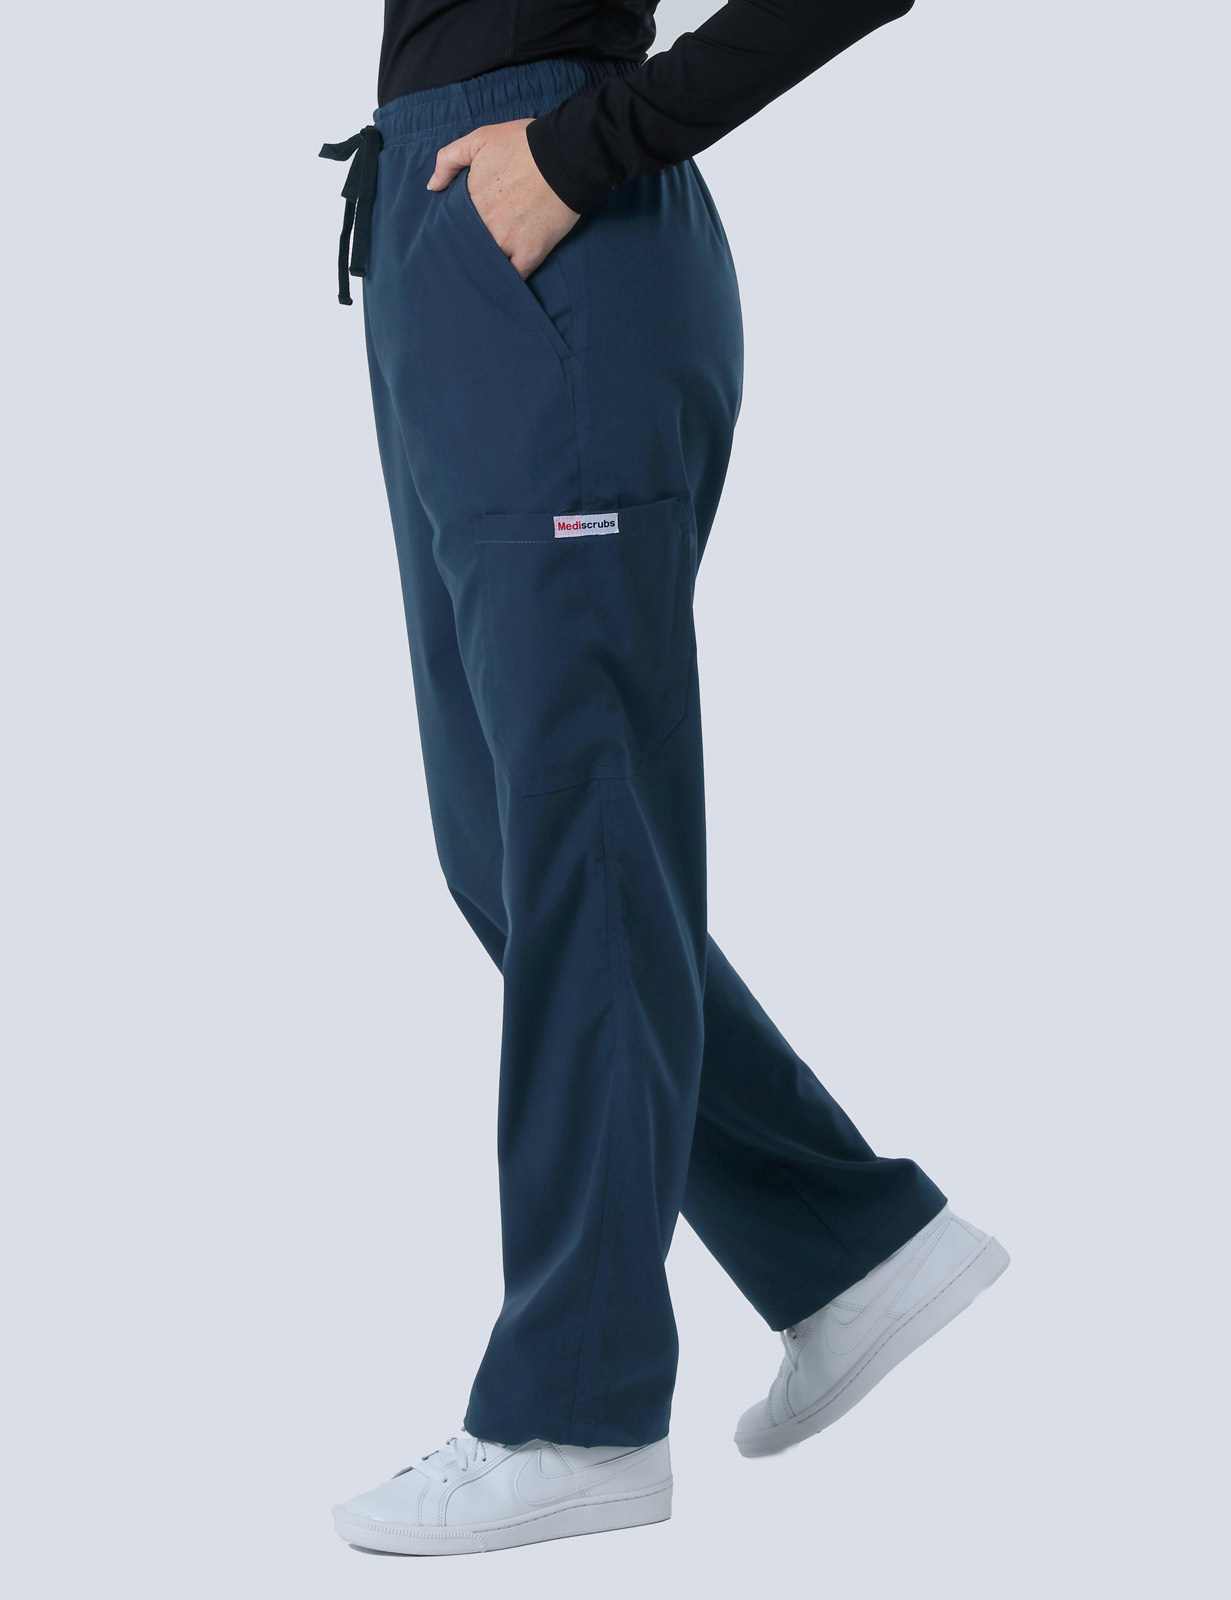 Weipa Hospital - ED EEN (Women's Fit Spandex Scrub Top and Cargo Pants in Navy incl Logos)